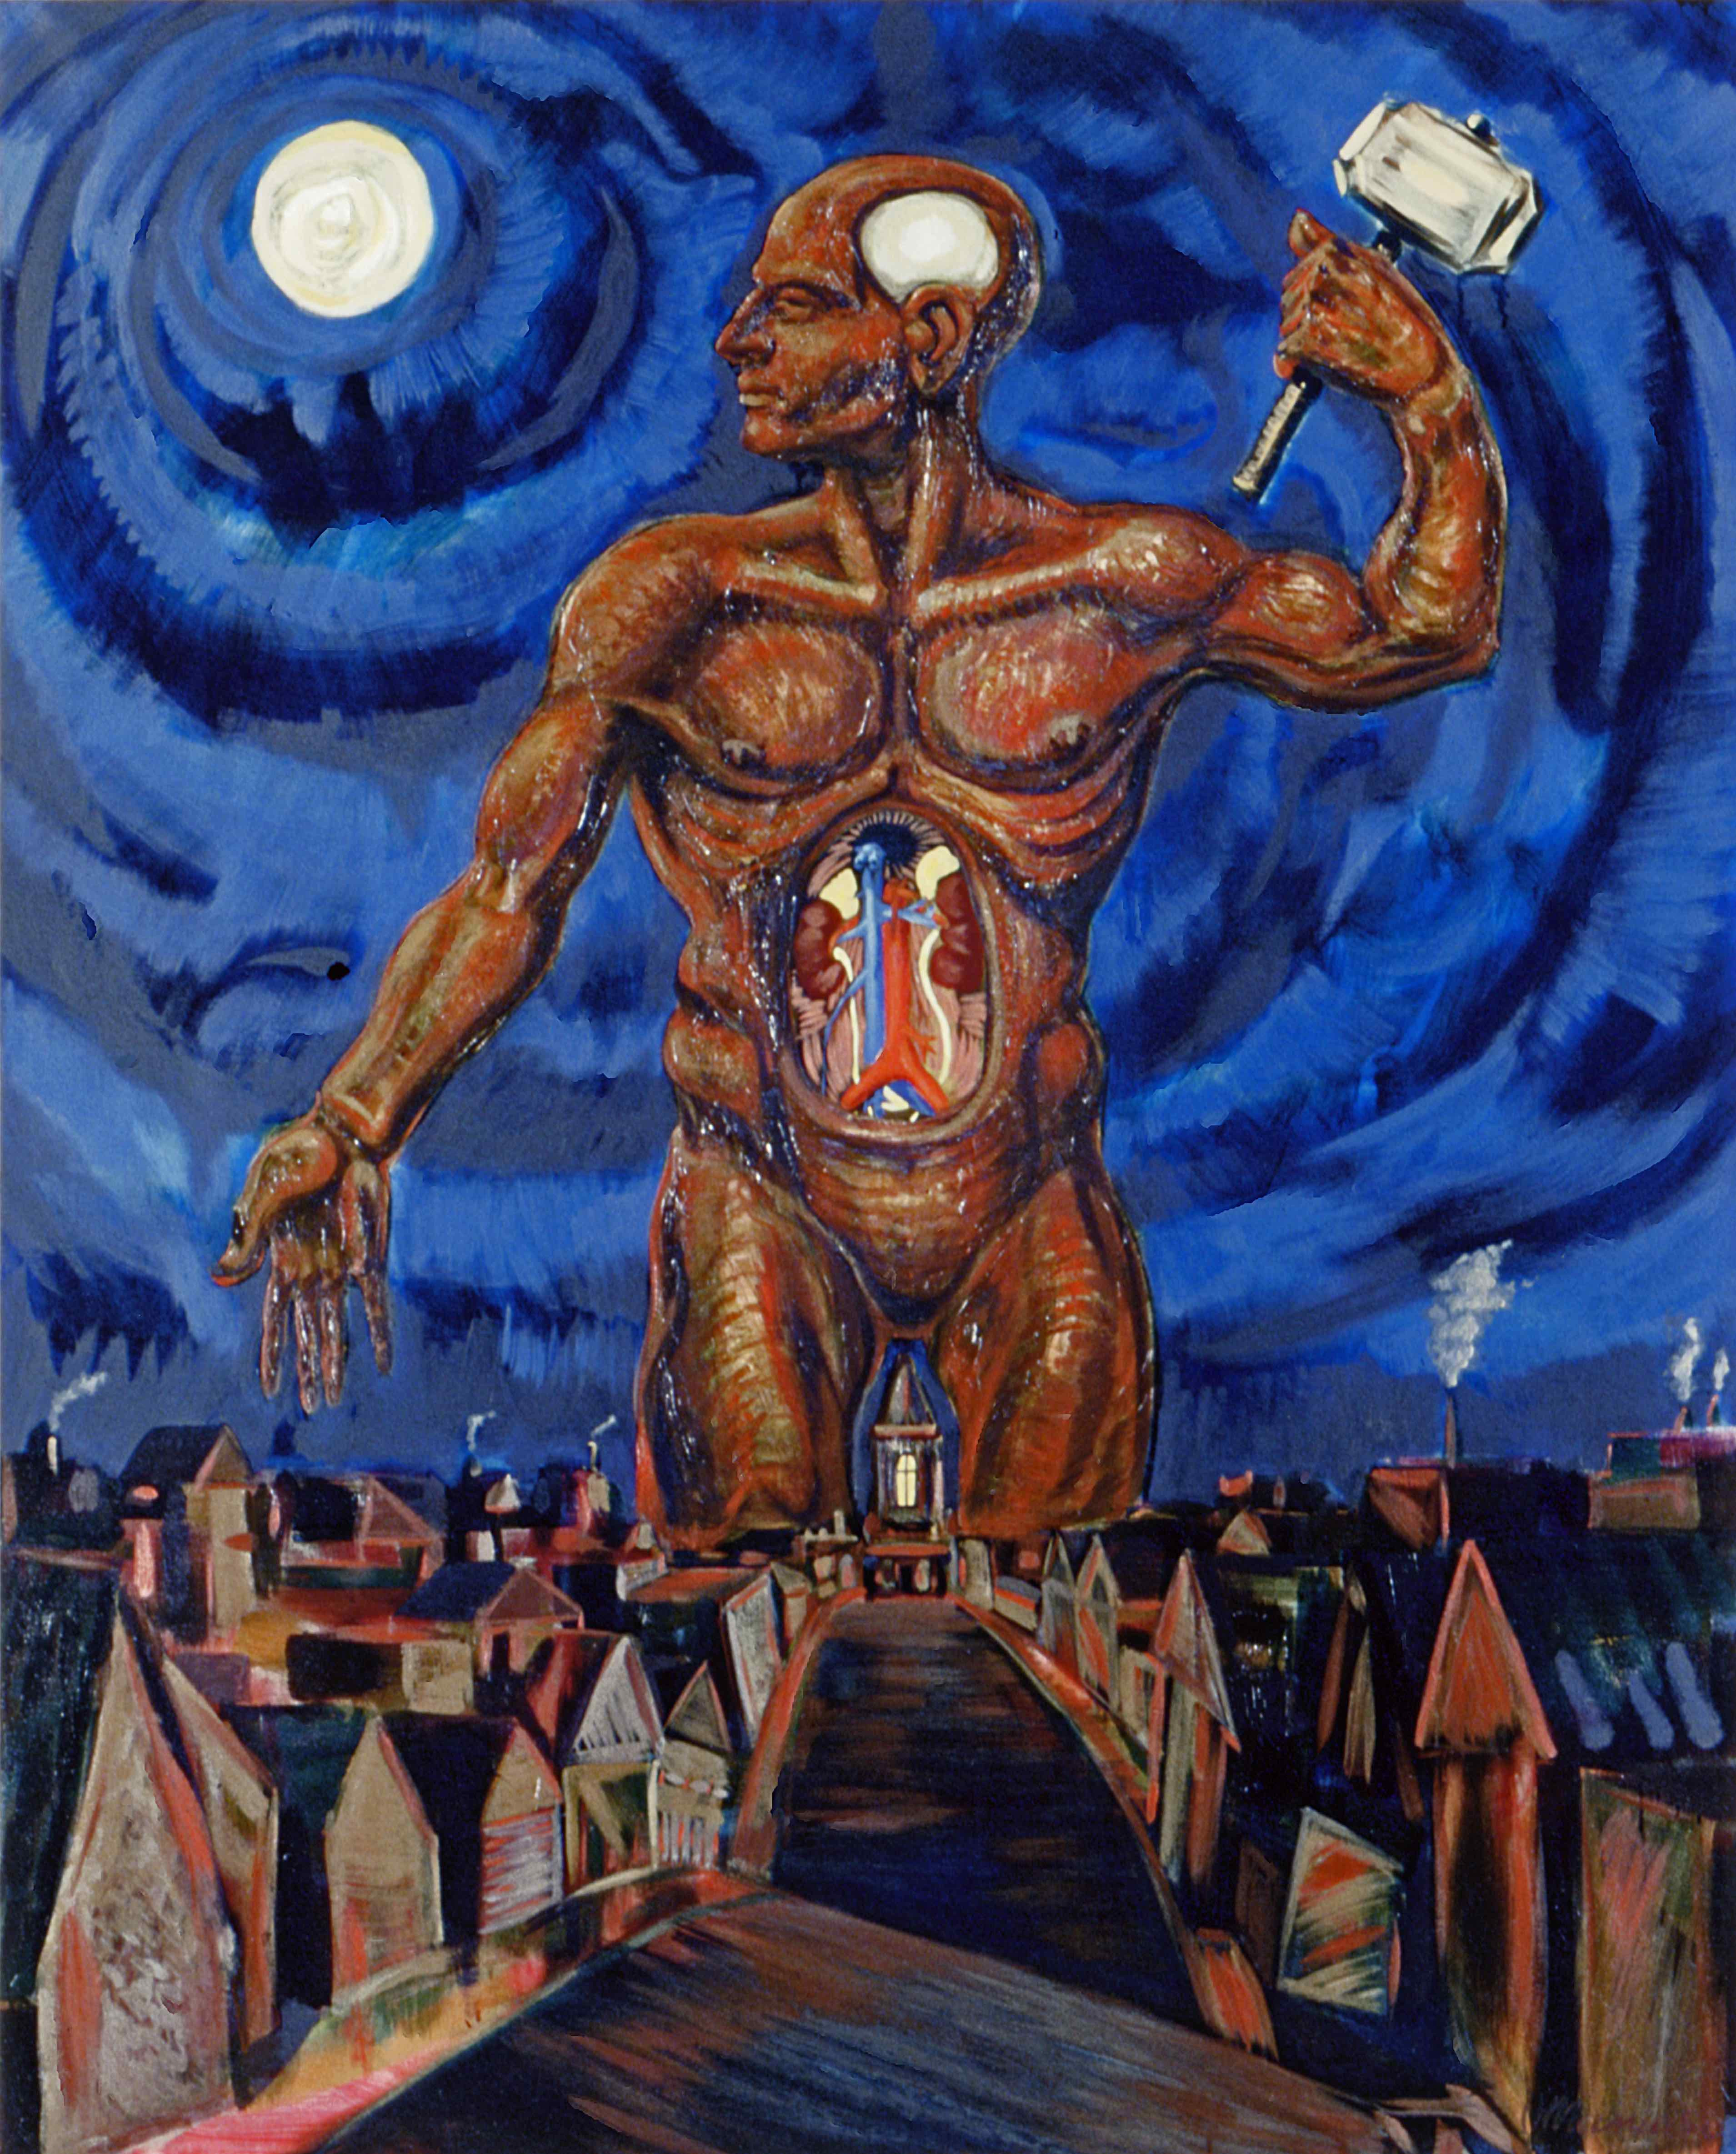 CADAVER MAN, painted by Vince Mancuso in 1990, oil on canvas, 6x4.5 feet. Available